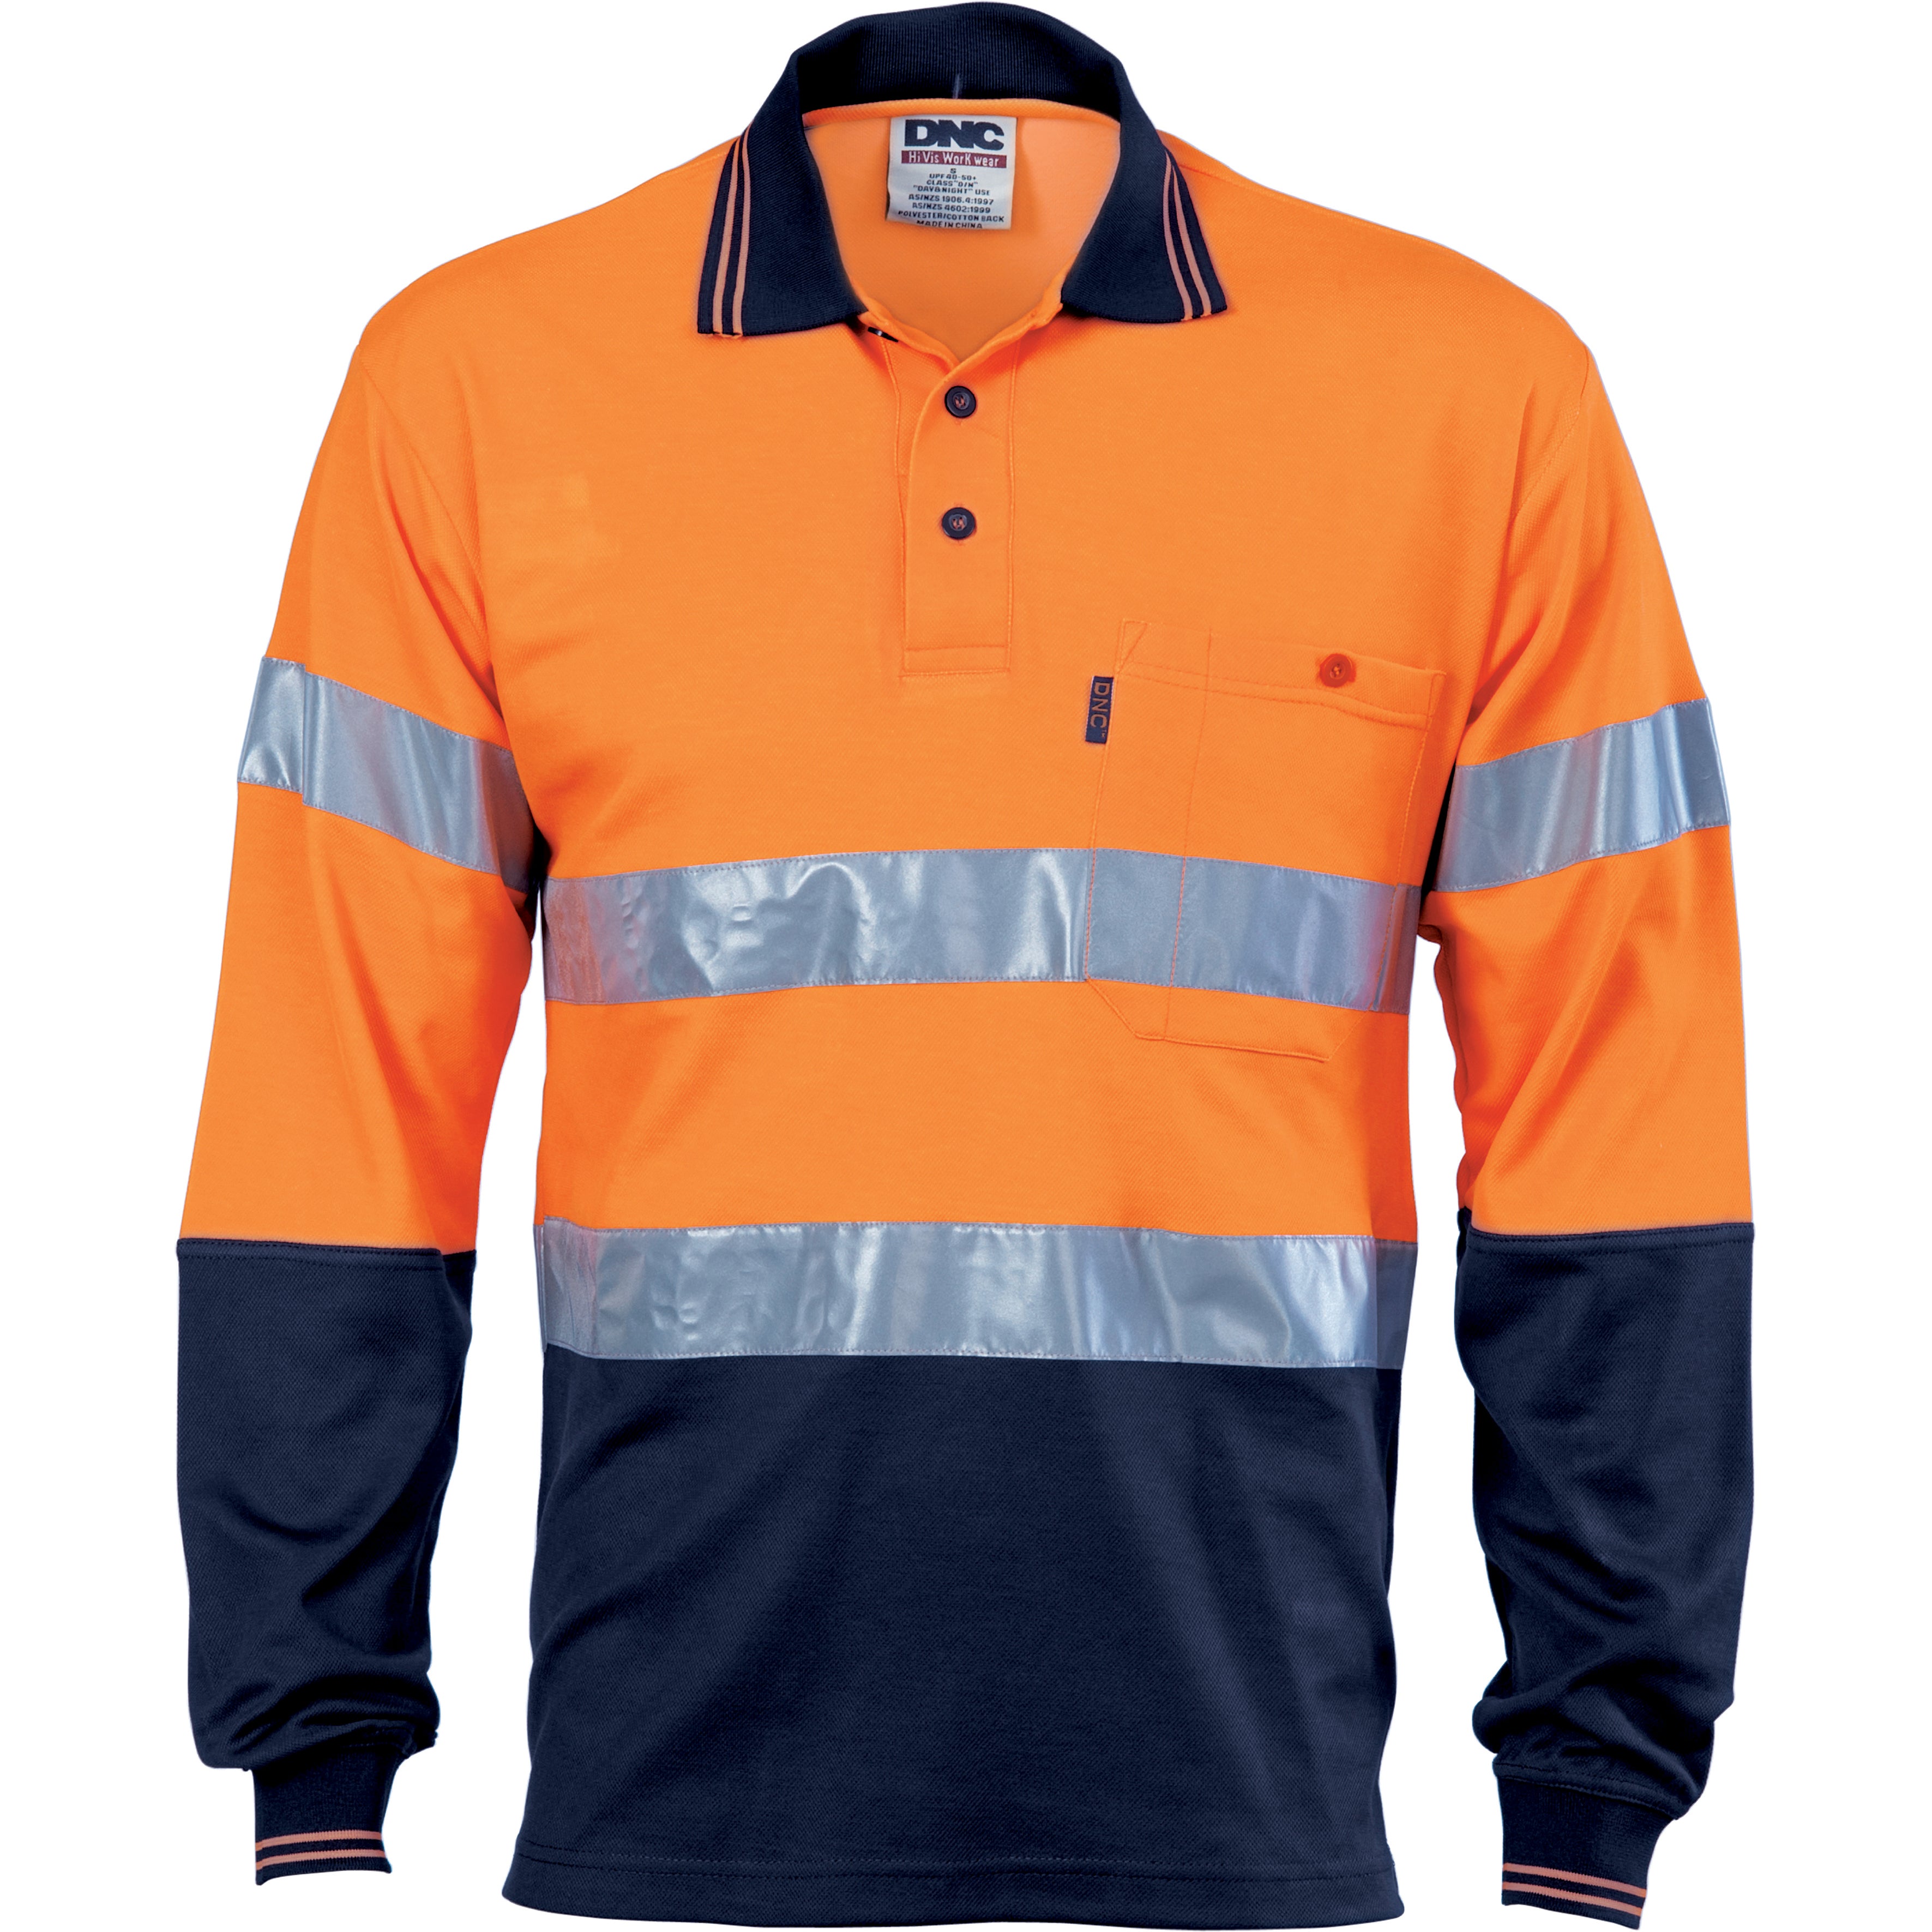 DNC - 3718 - Hi Vis Two Tone Cotton Back Polos with Generic Reflective Tape - Long Sleeve